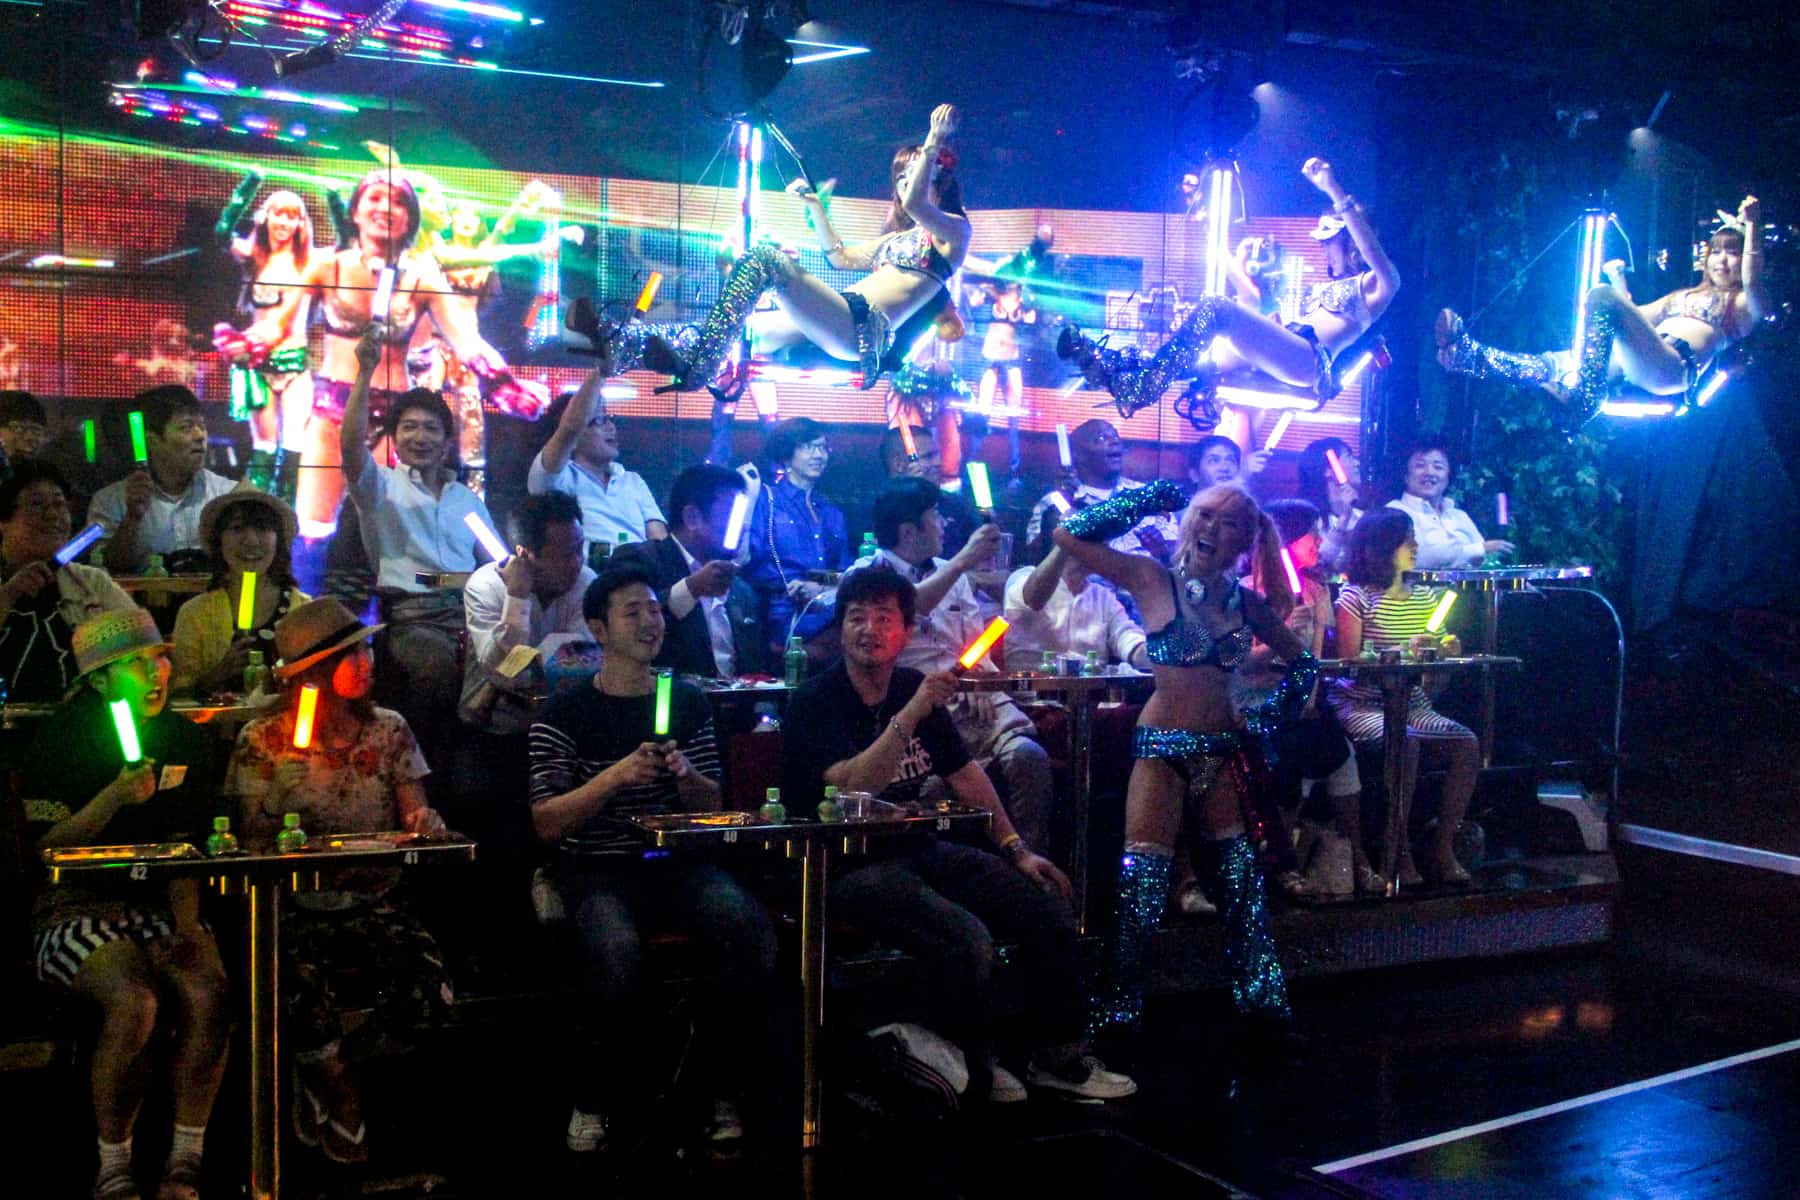 Women ride above an audience waving glow sticks at the Robot Restaurant in Tokyo. 